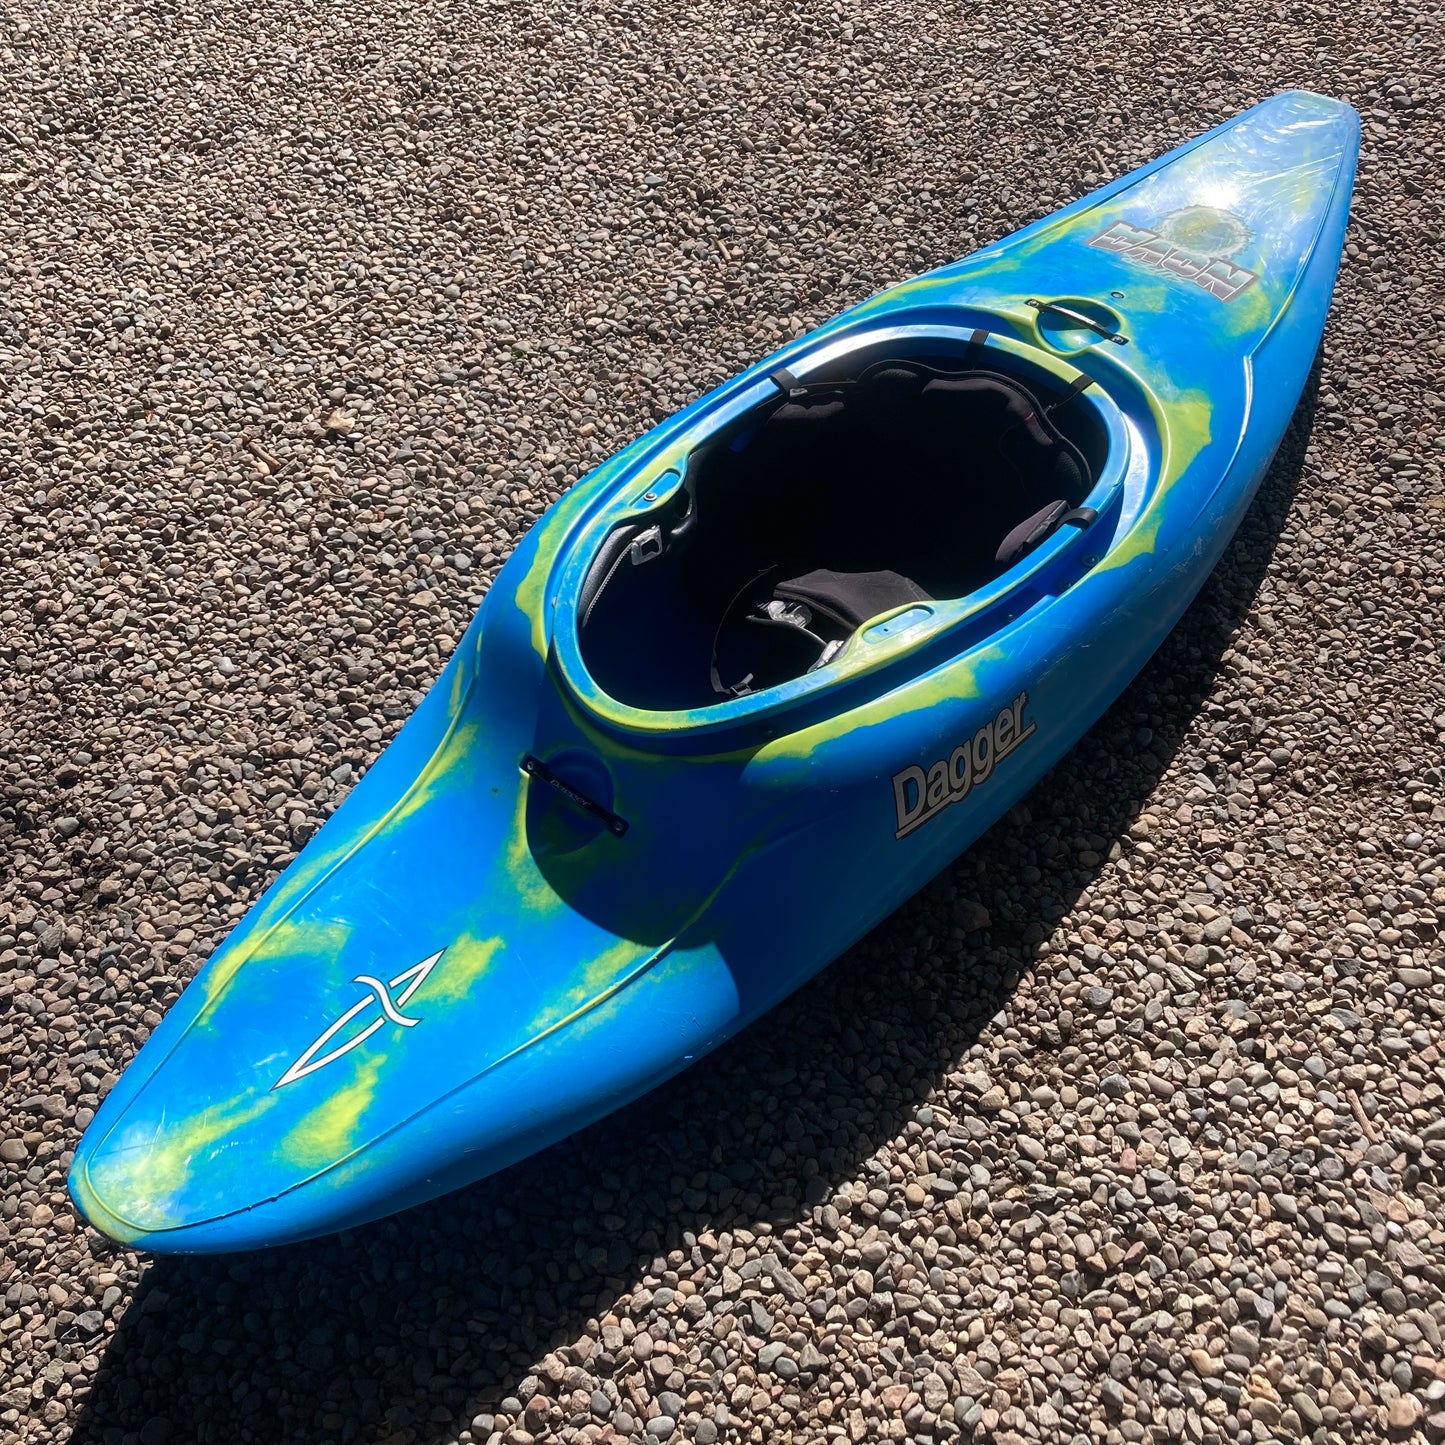 A blue and yellow Demo Supernova kayak laying on the ground. (Dagger)